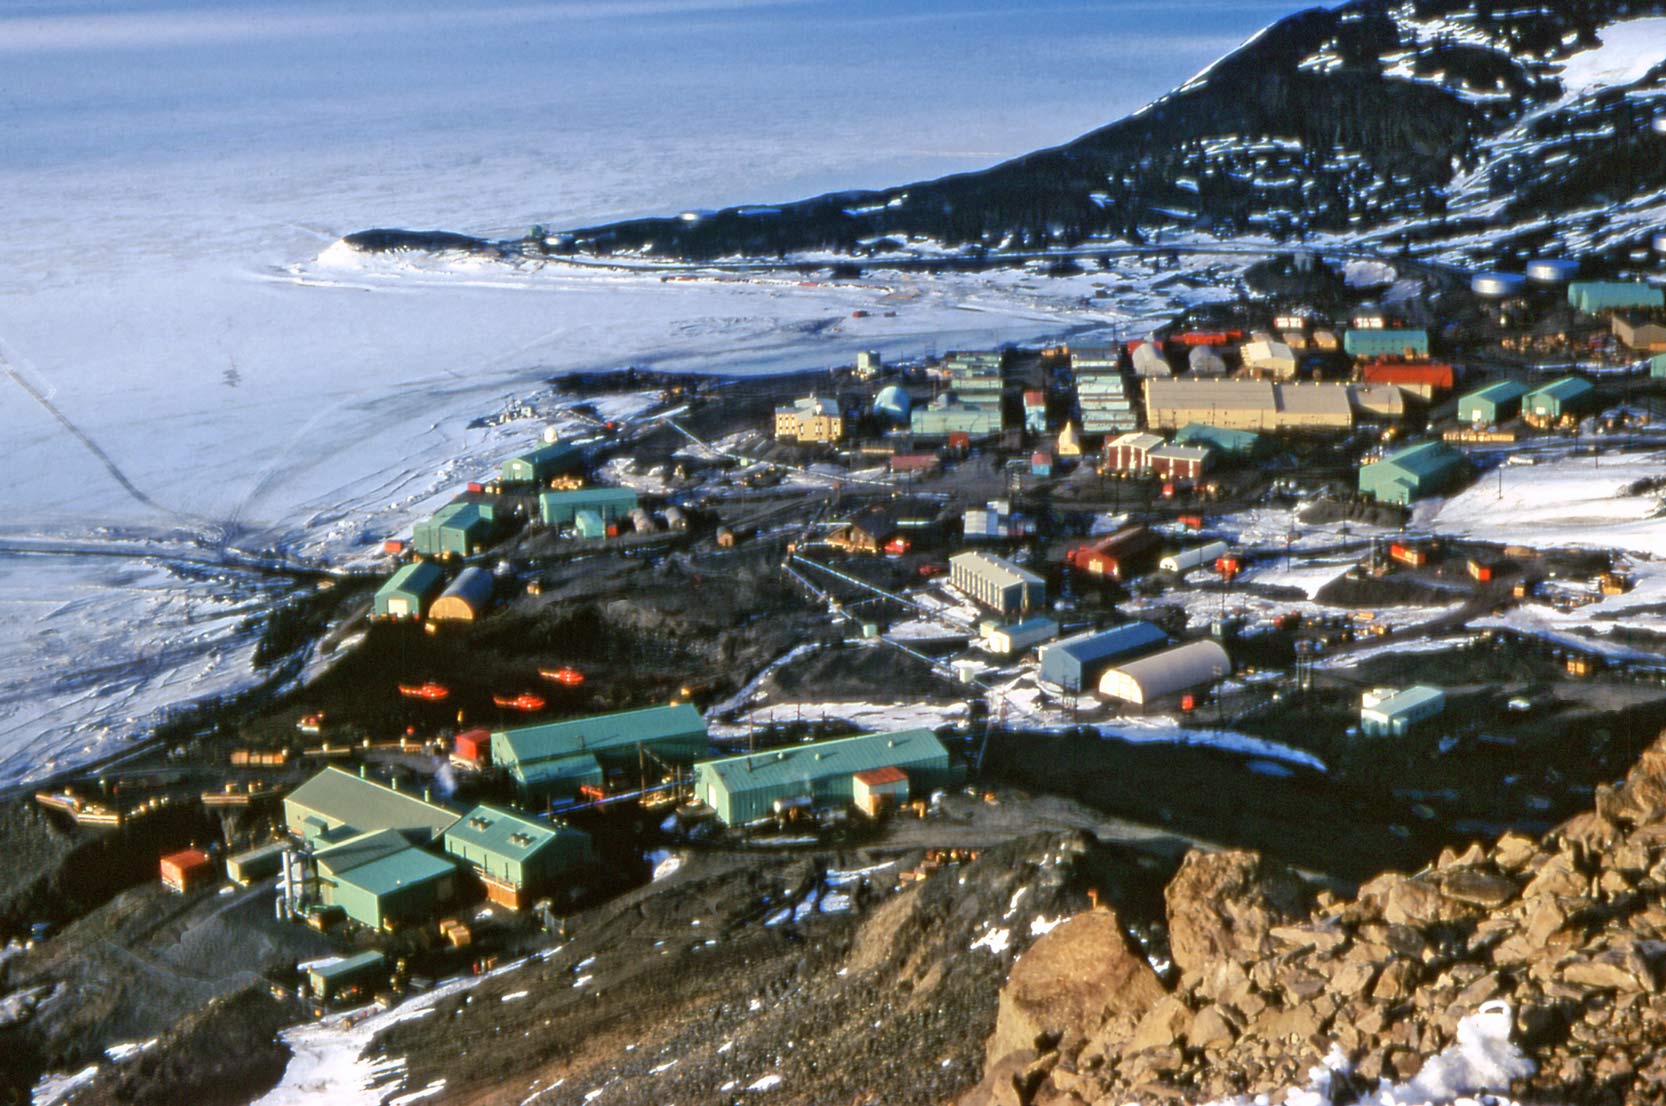 McMurdo Station as seen from Observation Hill, December 1972